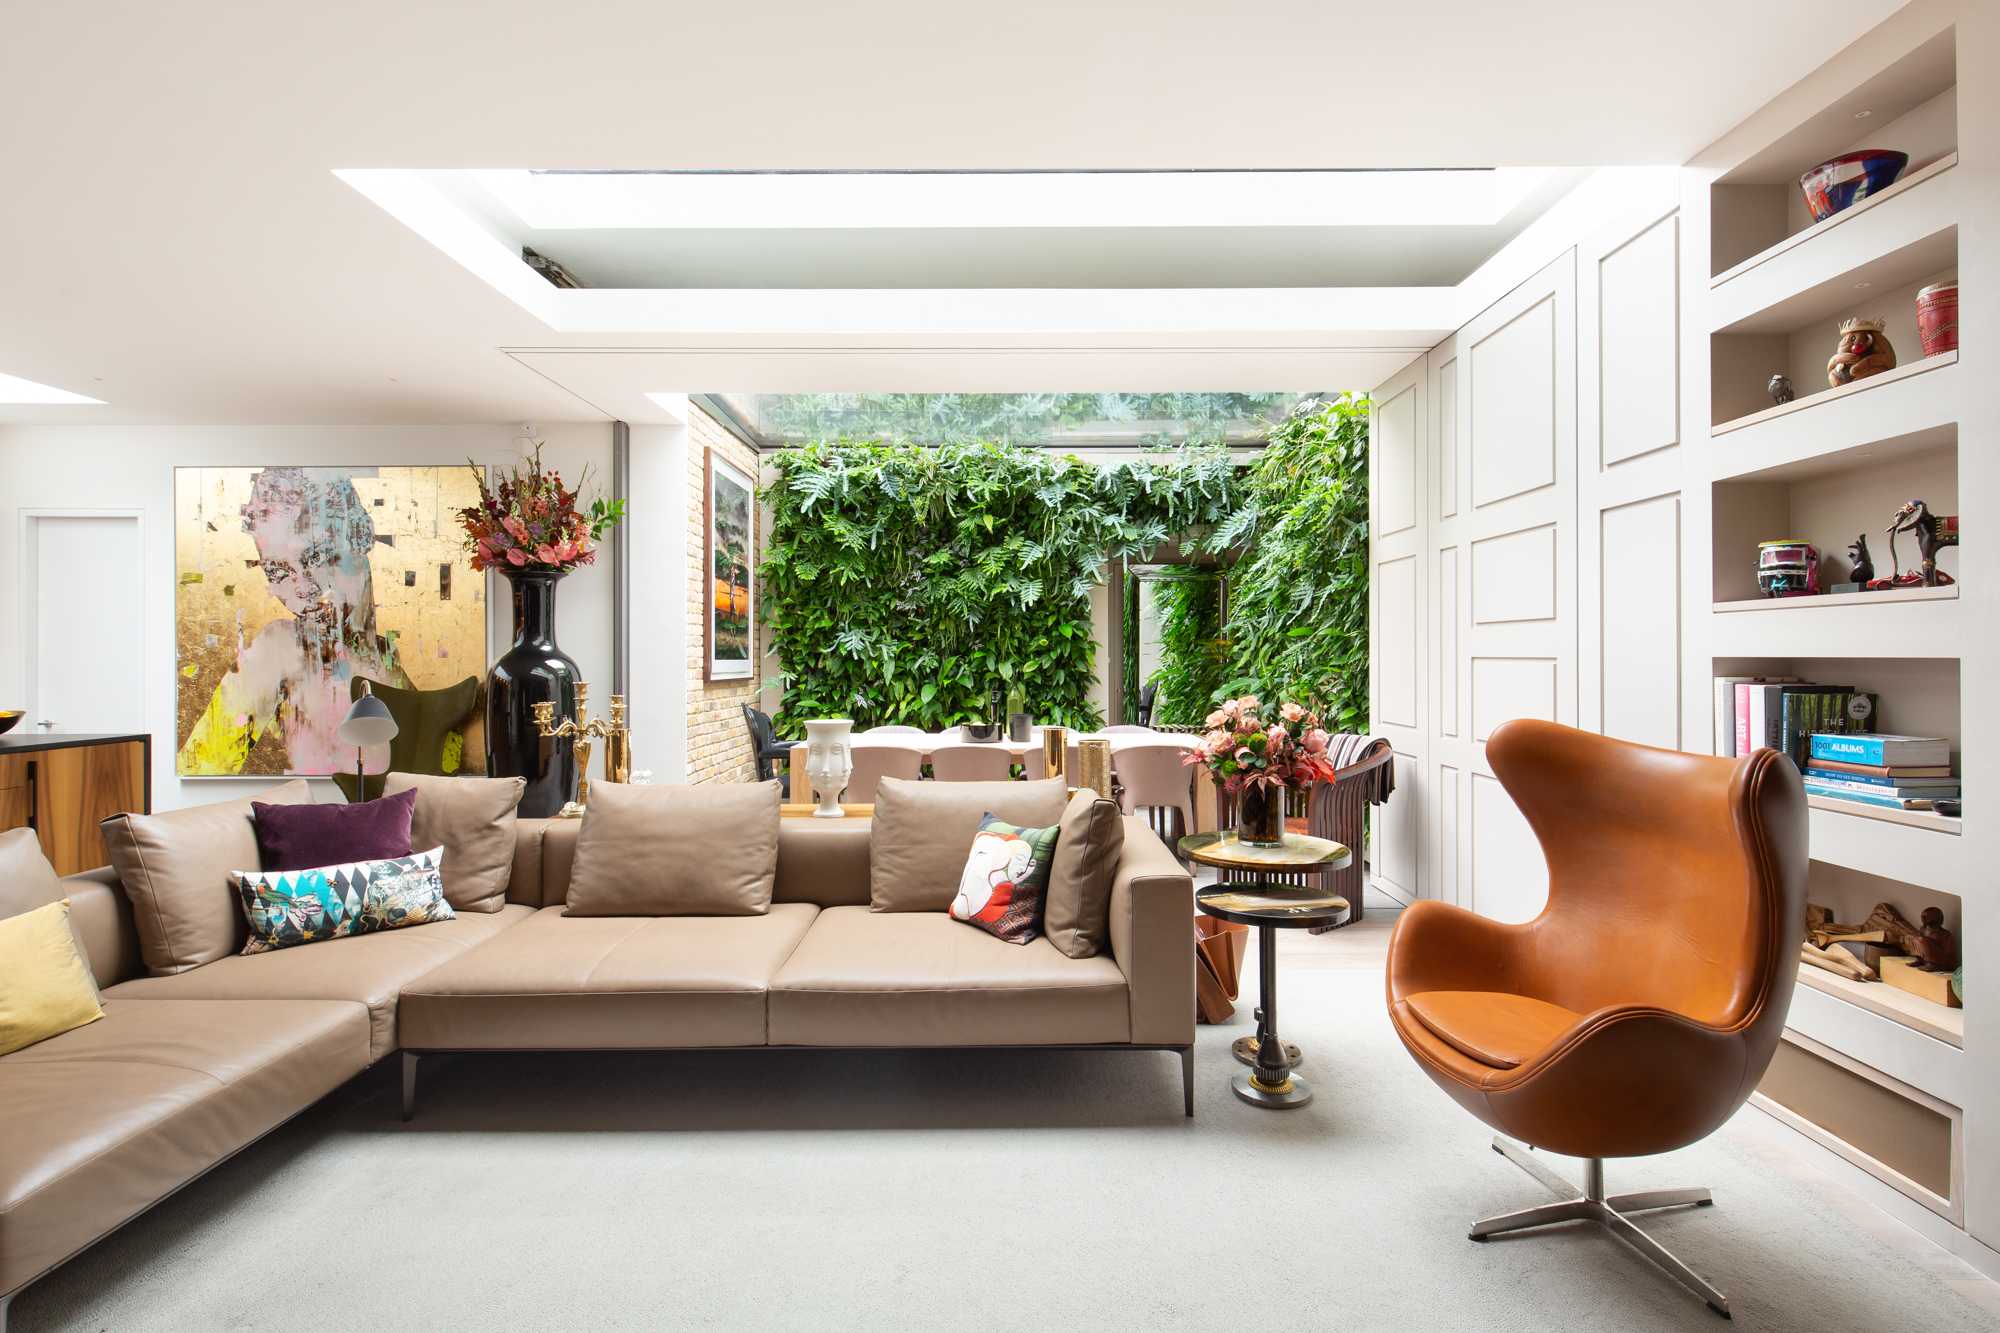 For Sale: Westbourne Grove Notting Hill W2 - a family house with a luxury living room featuring skylights and an indoor garden